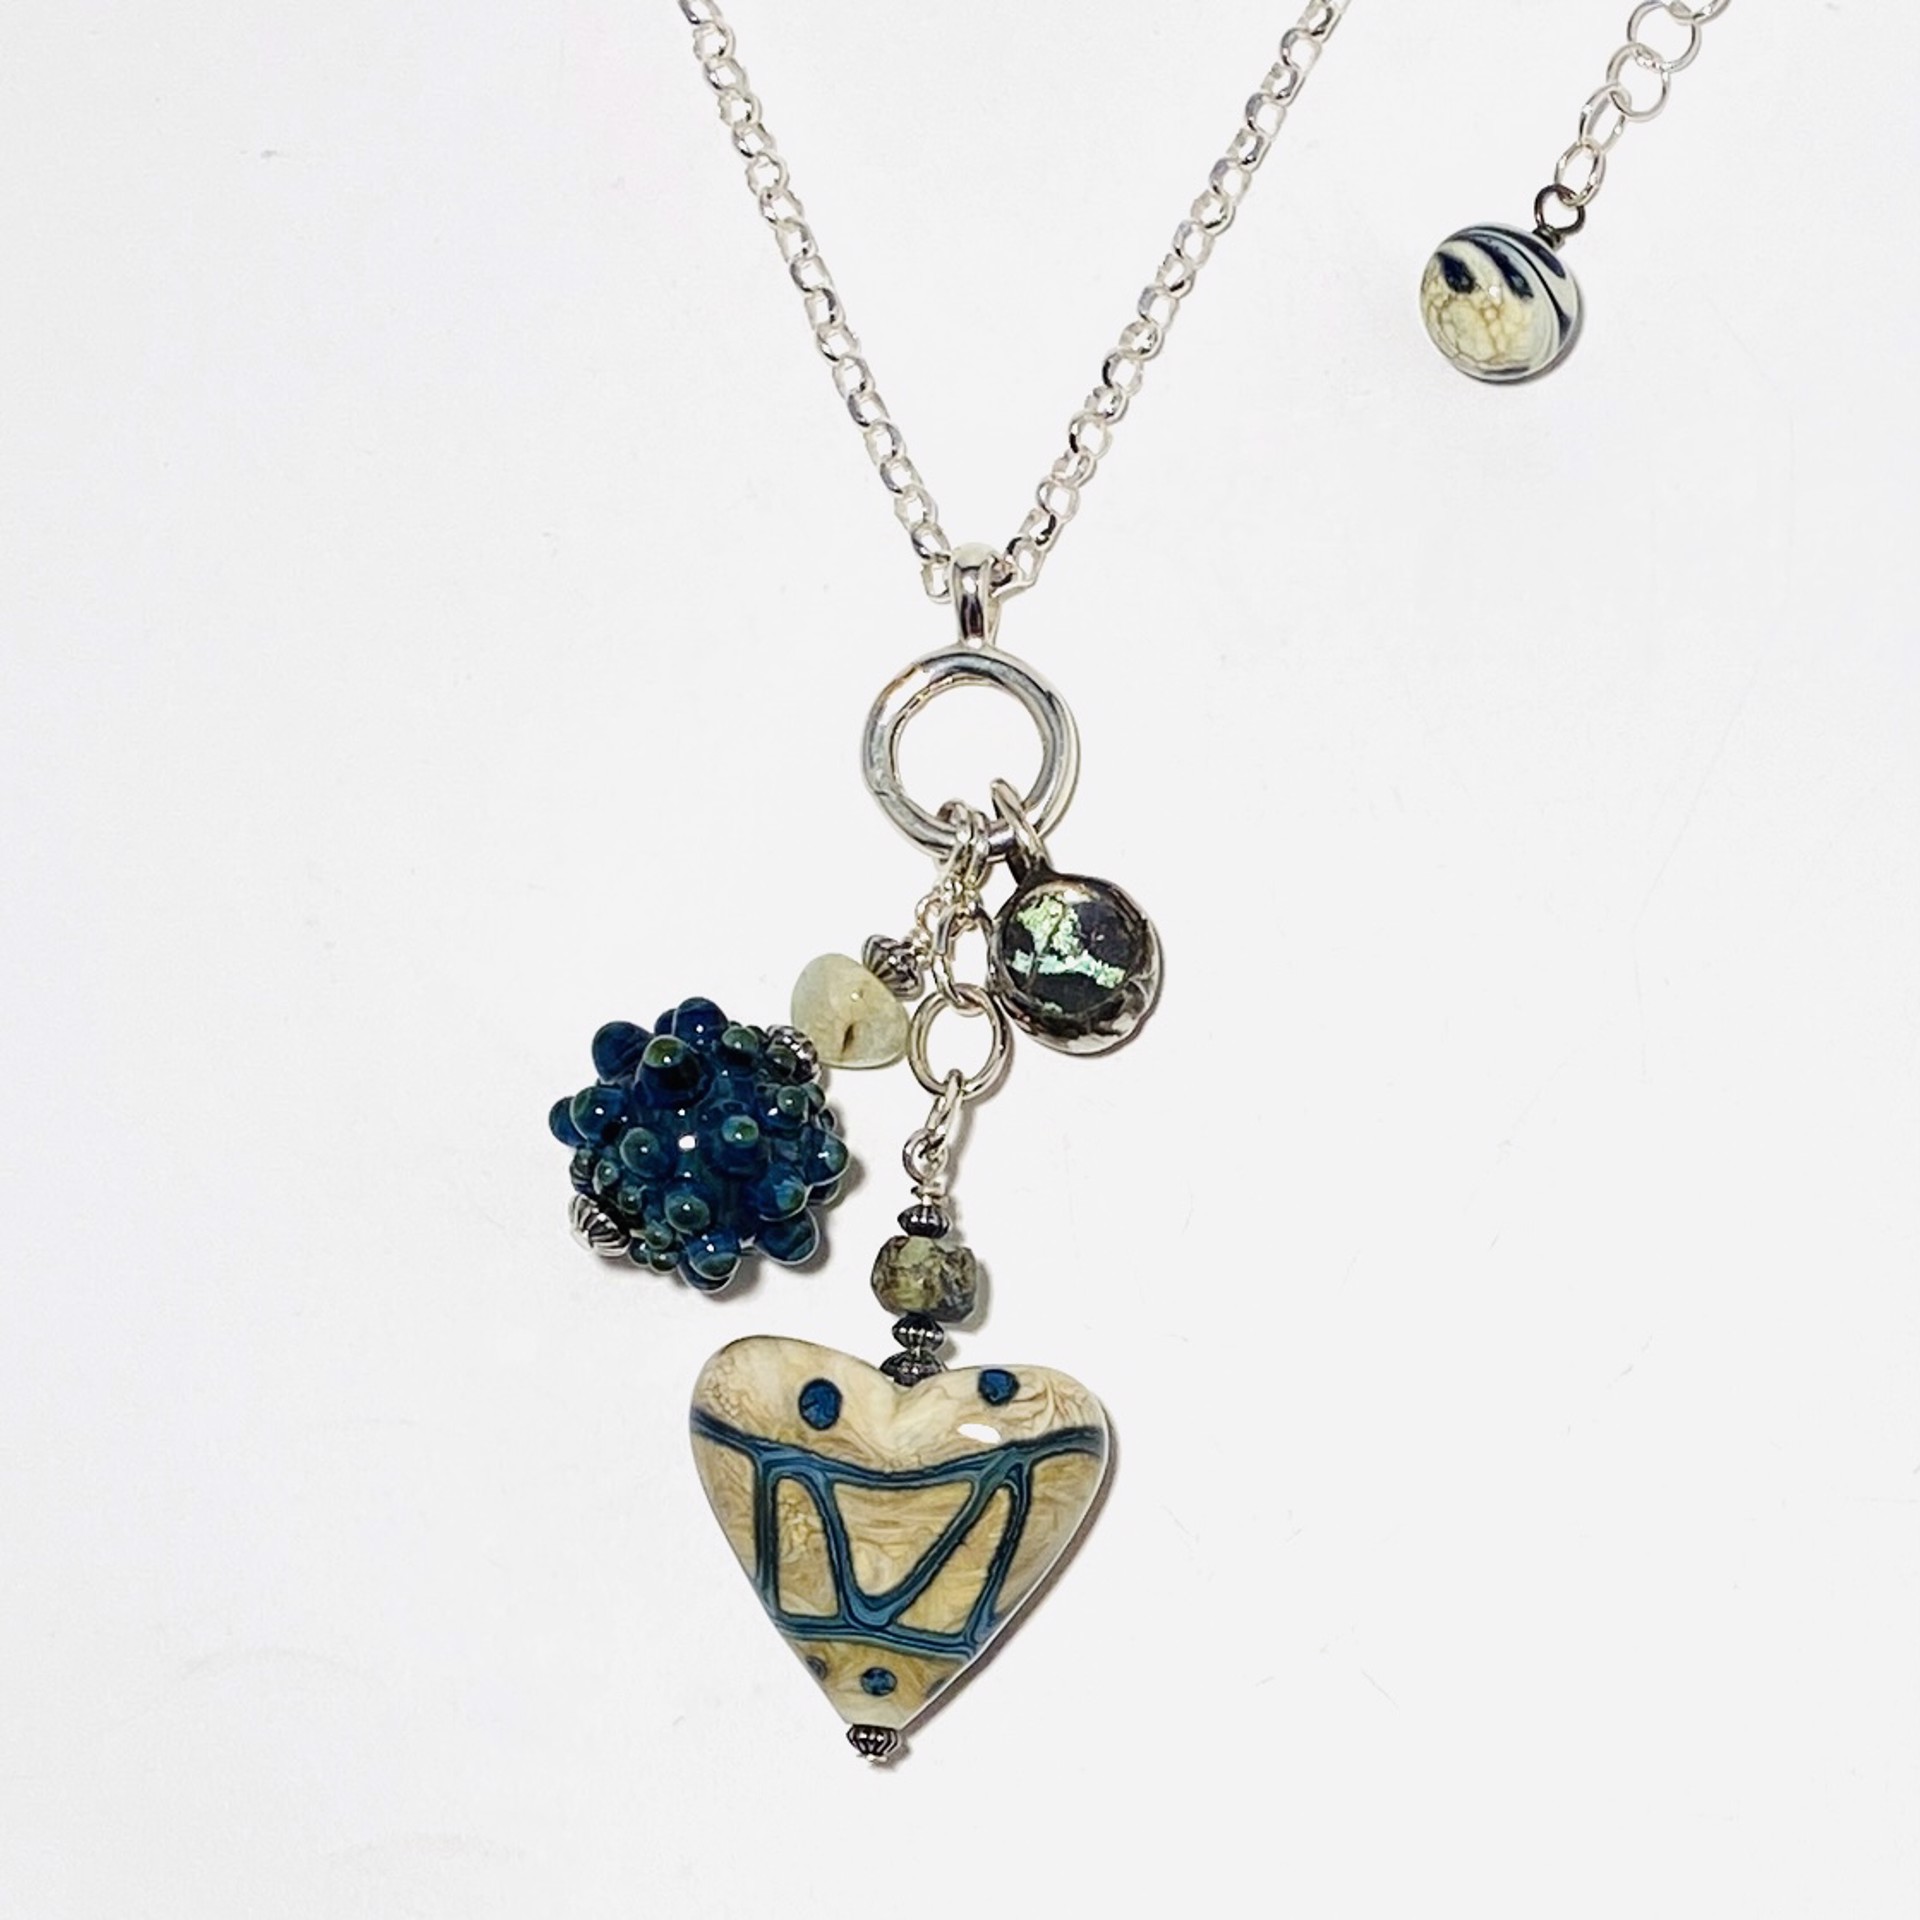 LS23-13A Avario Okamus Heart Small Butterfly Wing Dark Blue Dots Trio of Charms Diamond Cut Sterling Necklace with Charm Holder by Linda Sacra